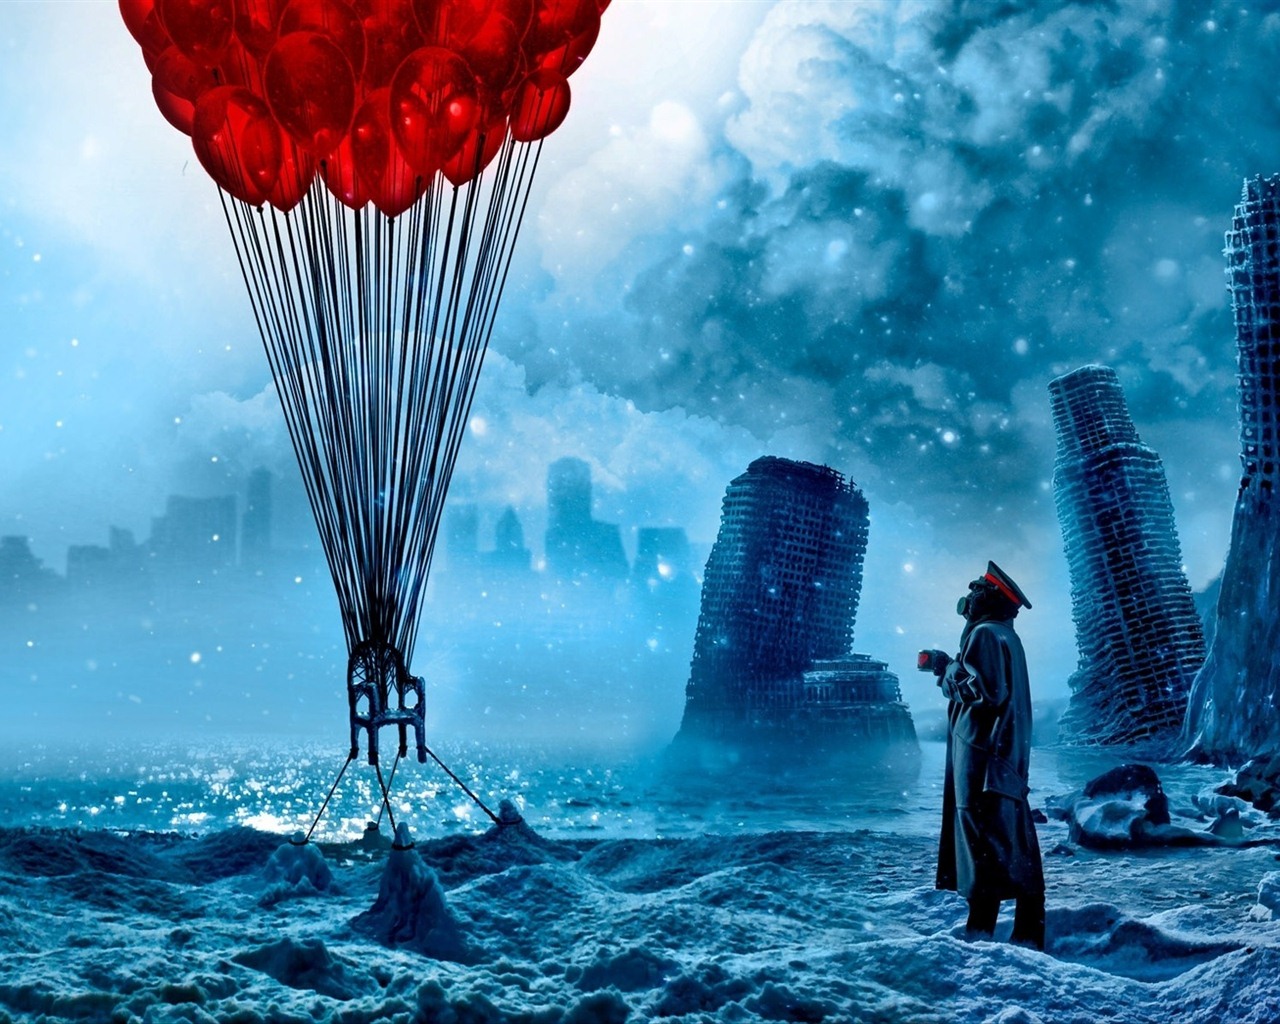 Romantically Apocalyptic creative painting wallpapers (1) #1 - 1280x1024